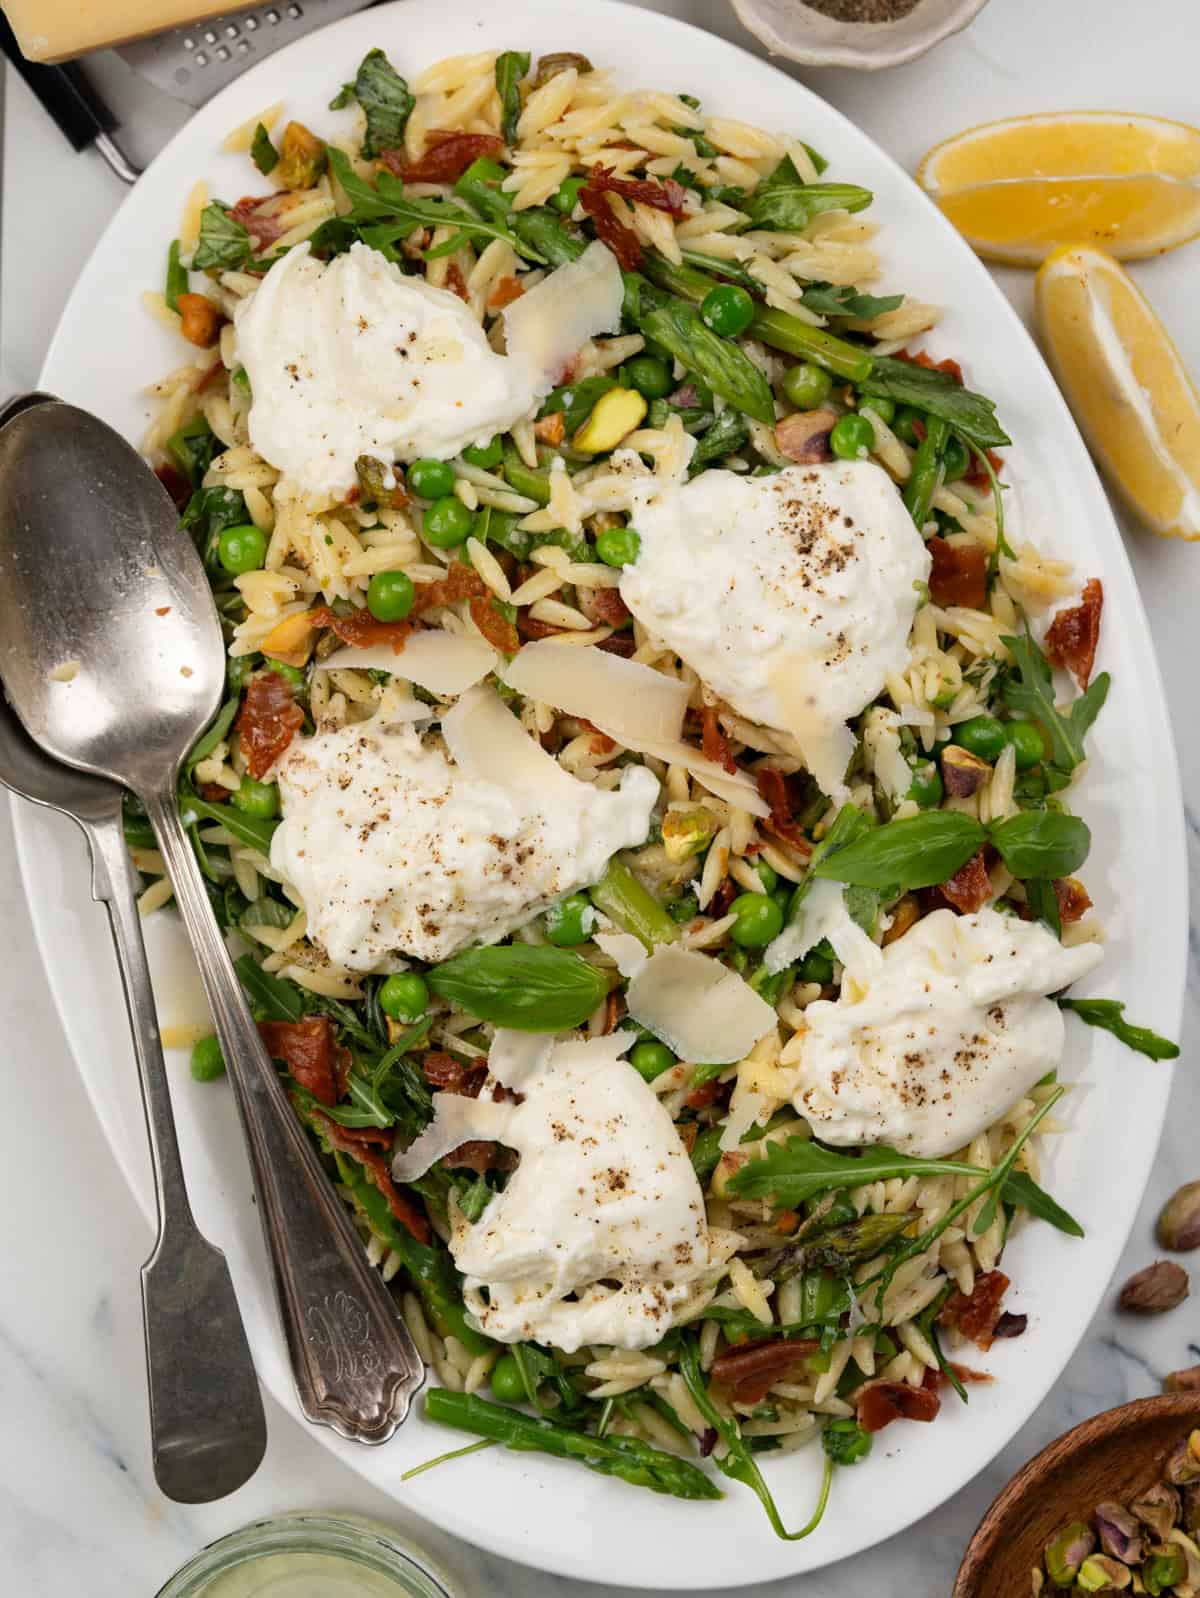 Orzo salad with spring vegetable, crispy prosciutto, pistachio dressed in EVVO, parmesan, fresh lemon juice. Topped with creamy burrata. 